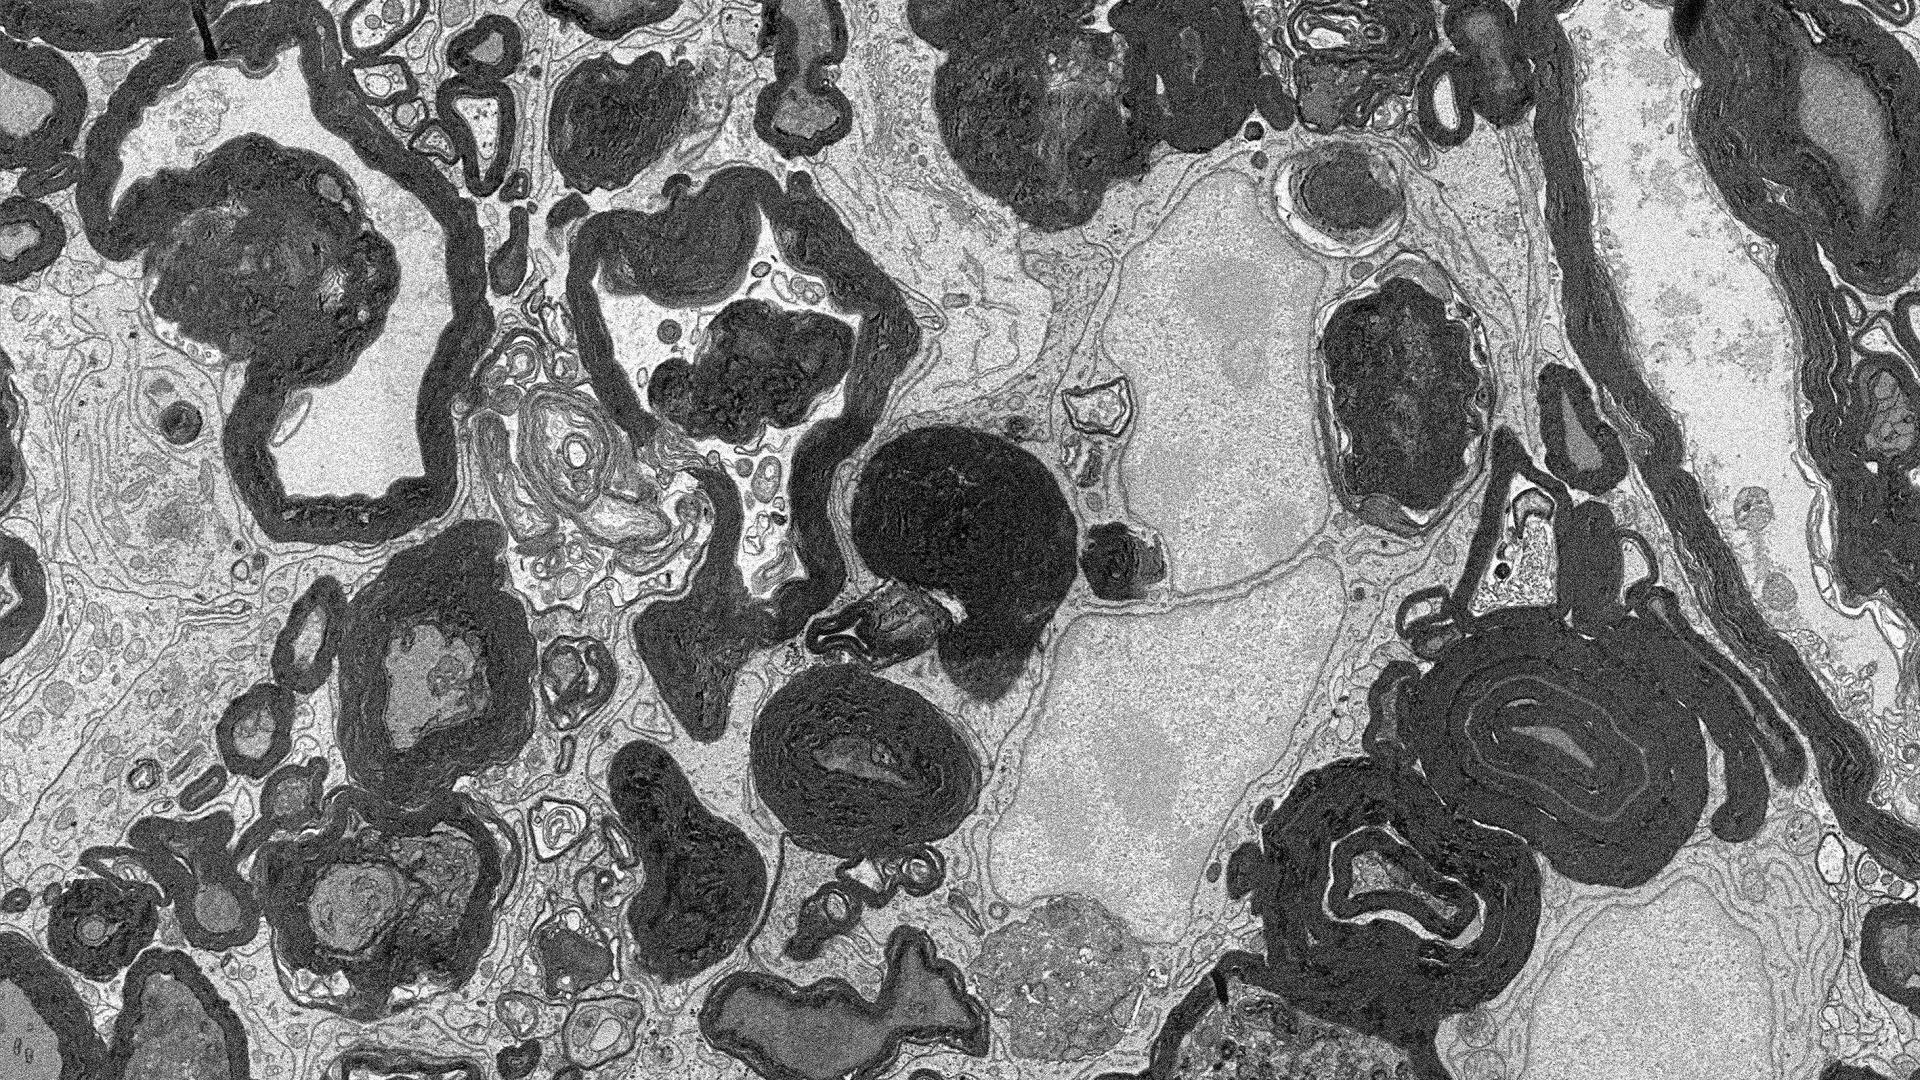 Microglia cells acquired with scanning electron microscopy